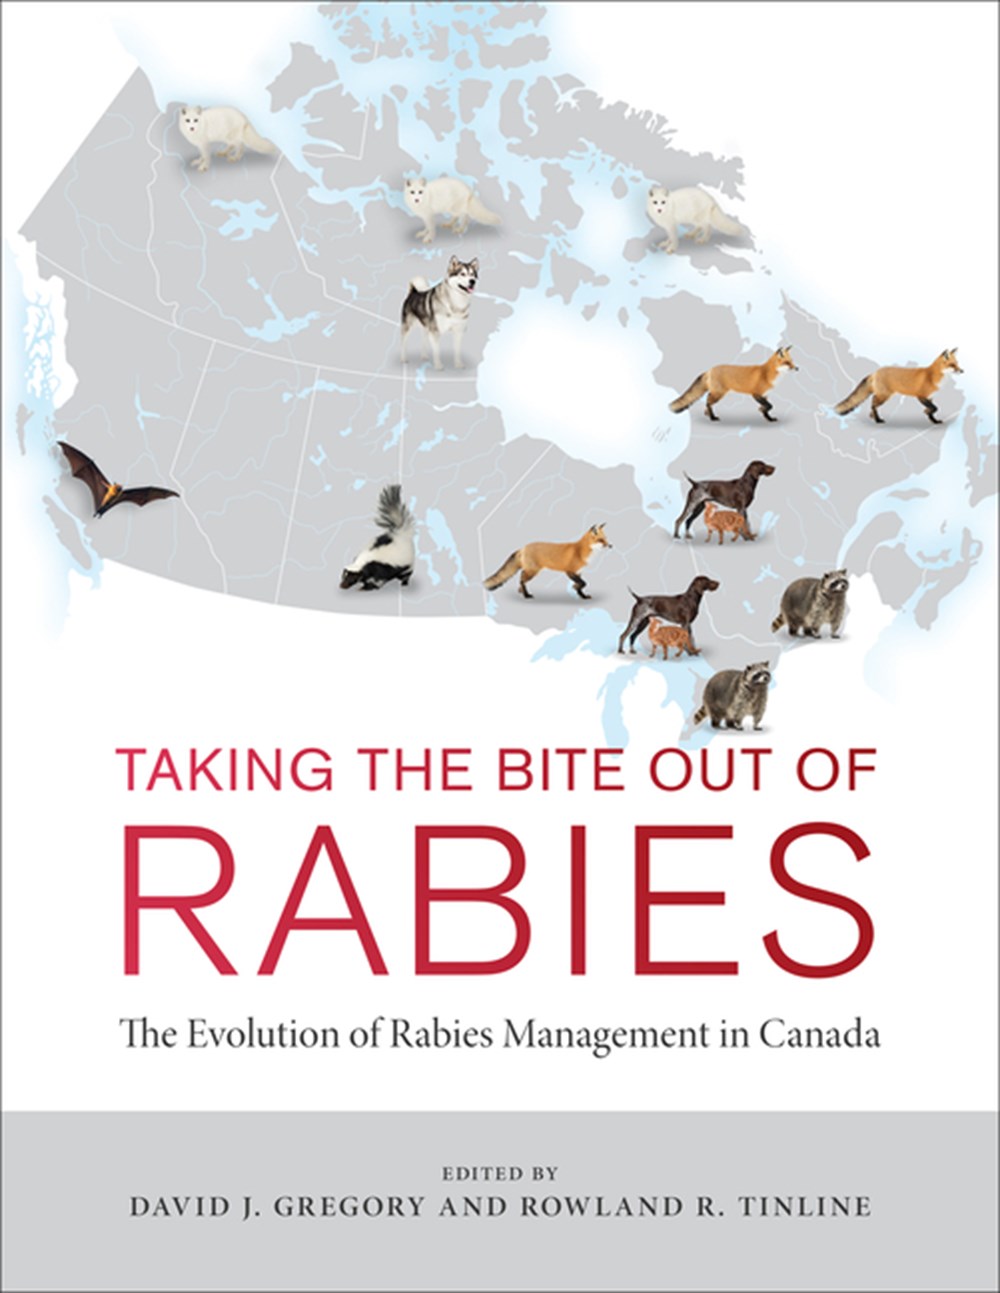 Taking the Bite Out of Rabies: The Evolution of Rabies Management in Canada